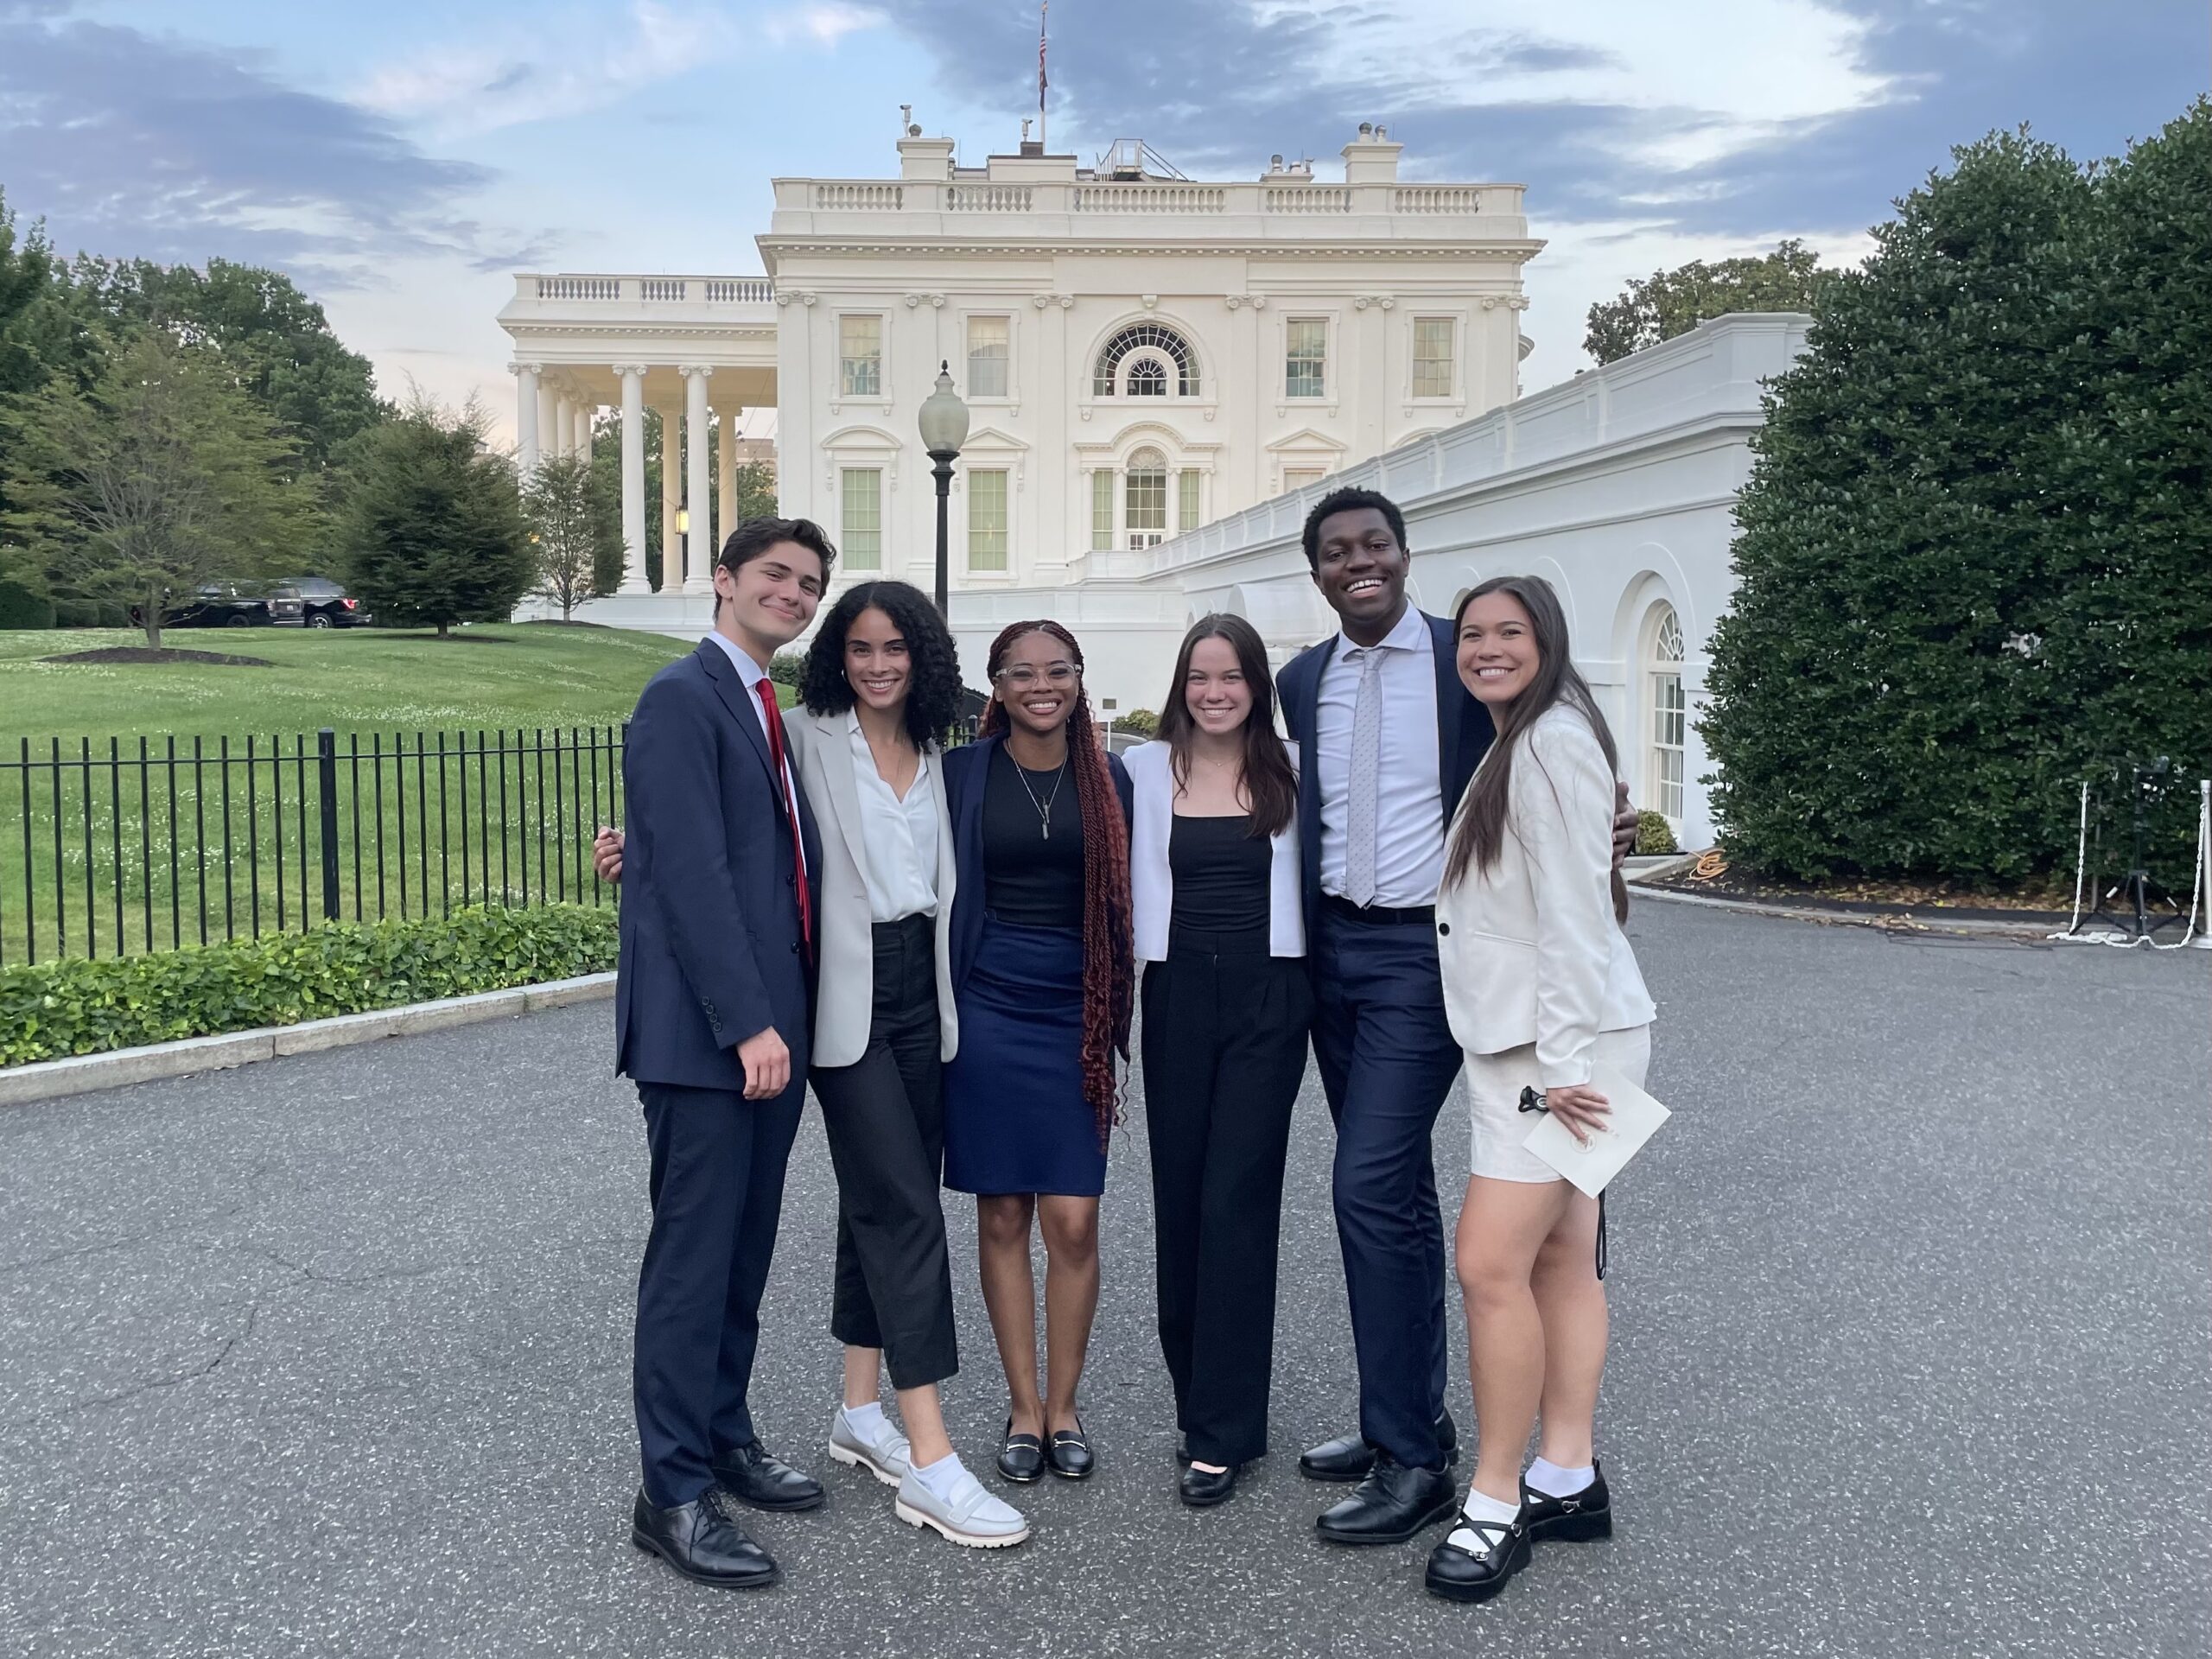 Richard Steiner-Otoo and his fellow interns at the Office of Public Engagement standing outside of the White House. 
Photo courtesy of Richard Steiner-Otoo